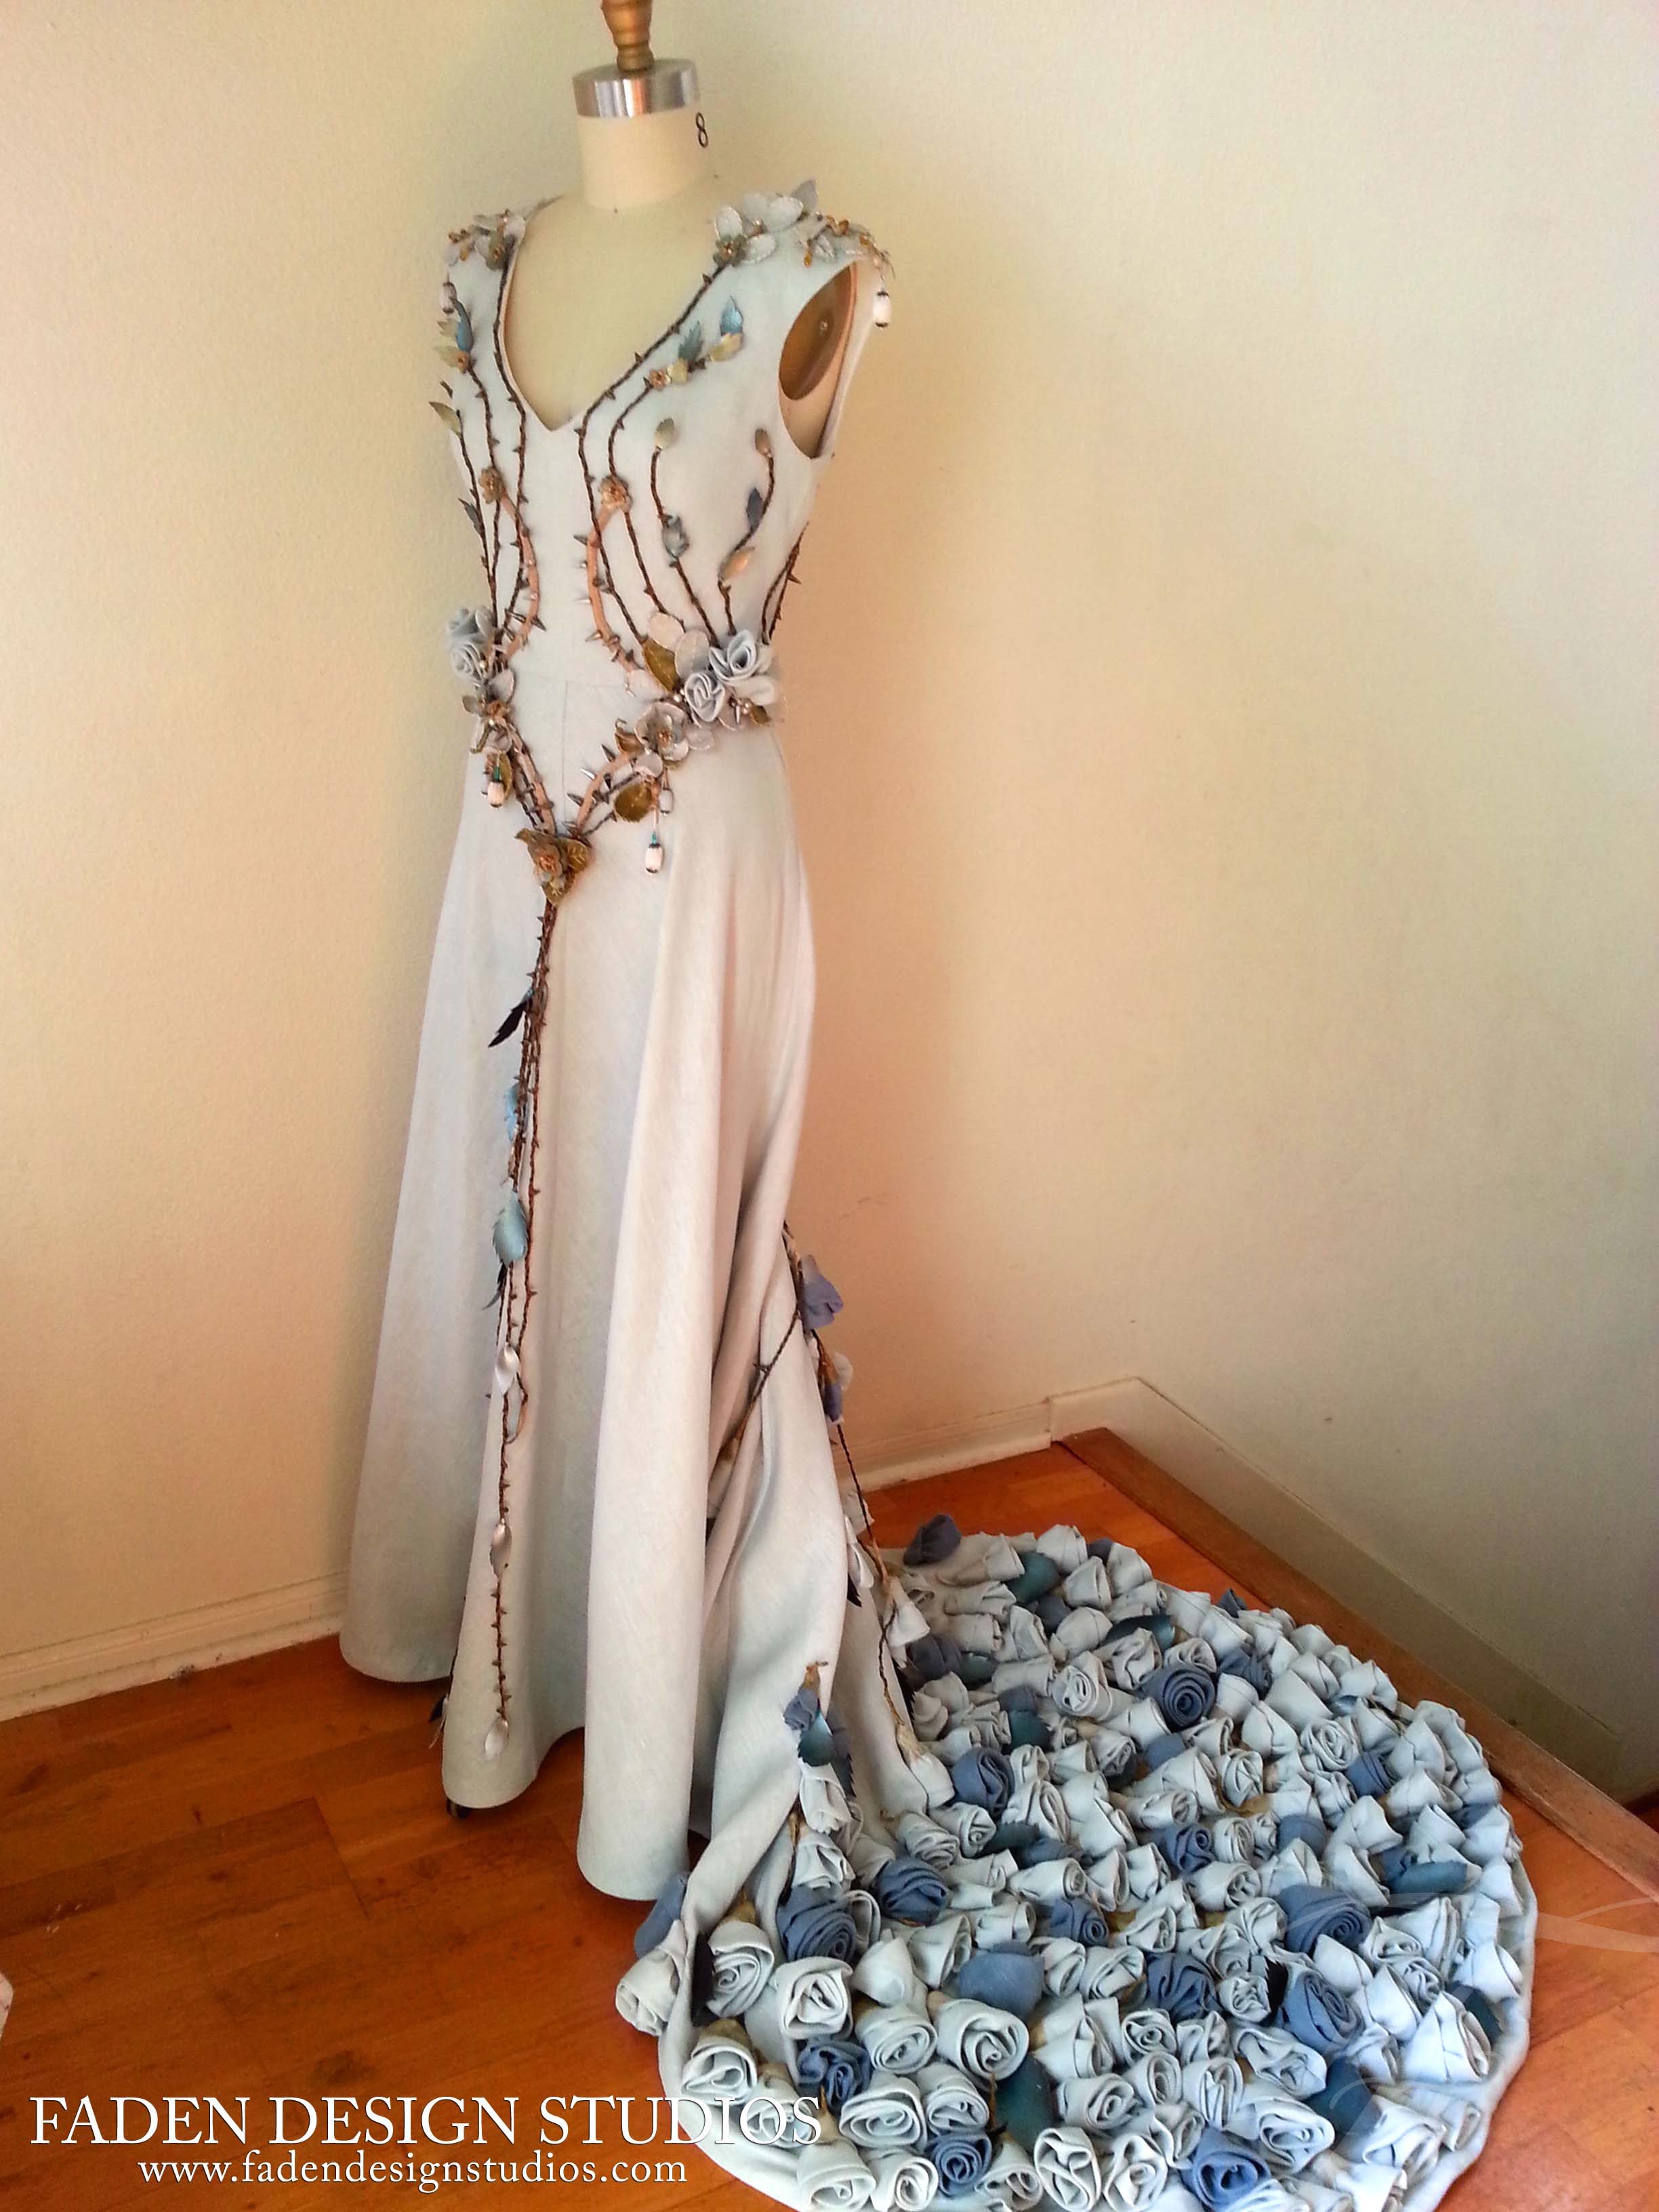 Romy, Our recreation of Margaery Tyrells wedding dress featured in the HBO series, Game of Thrones- for I...